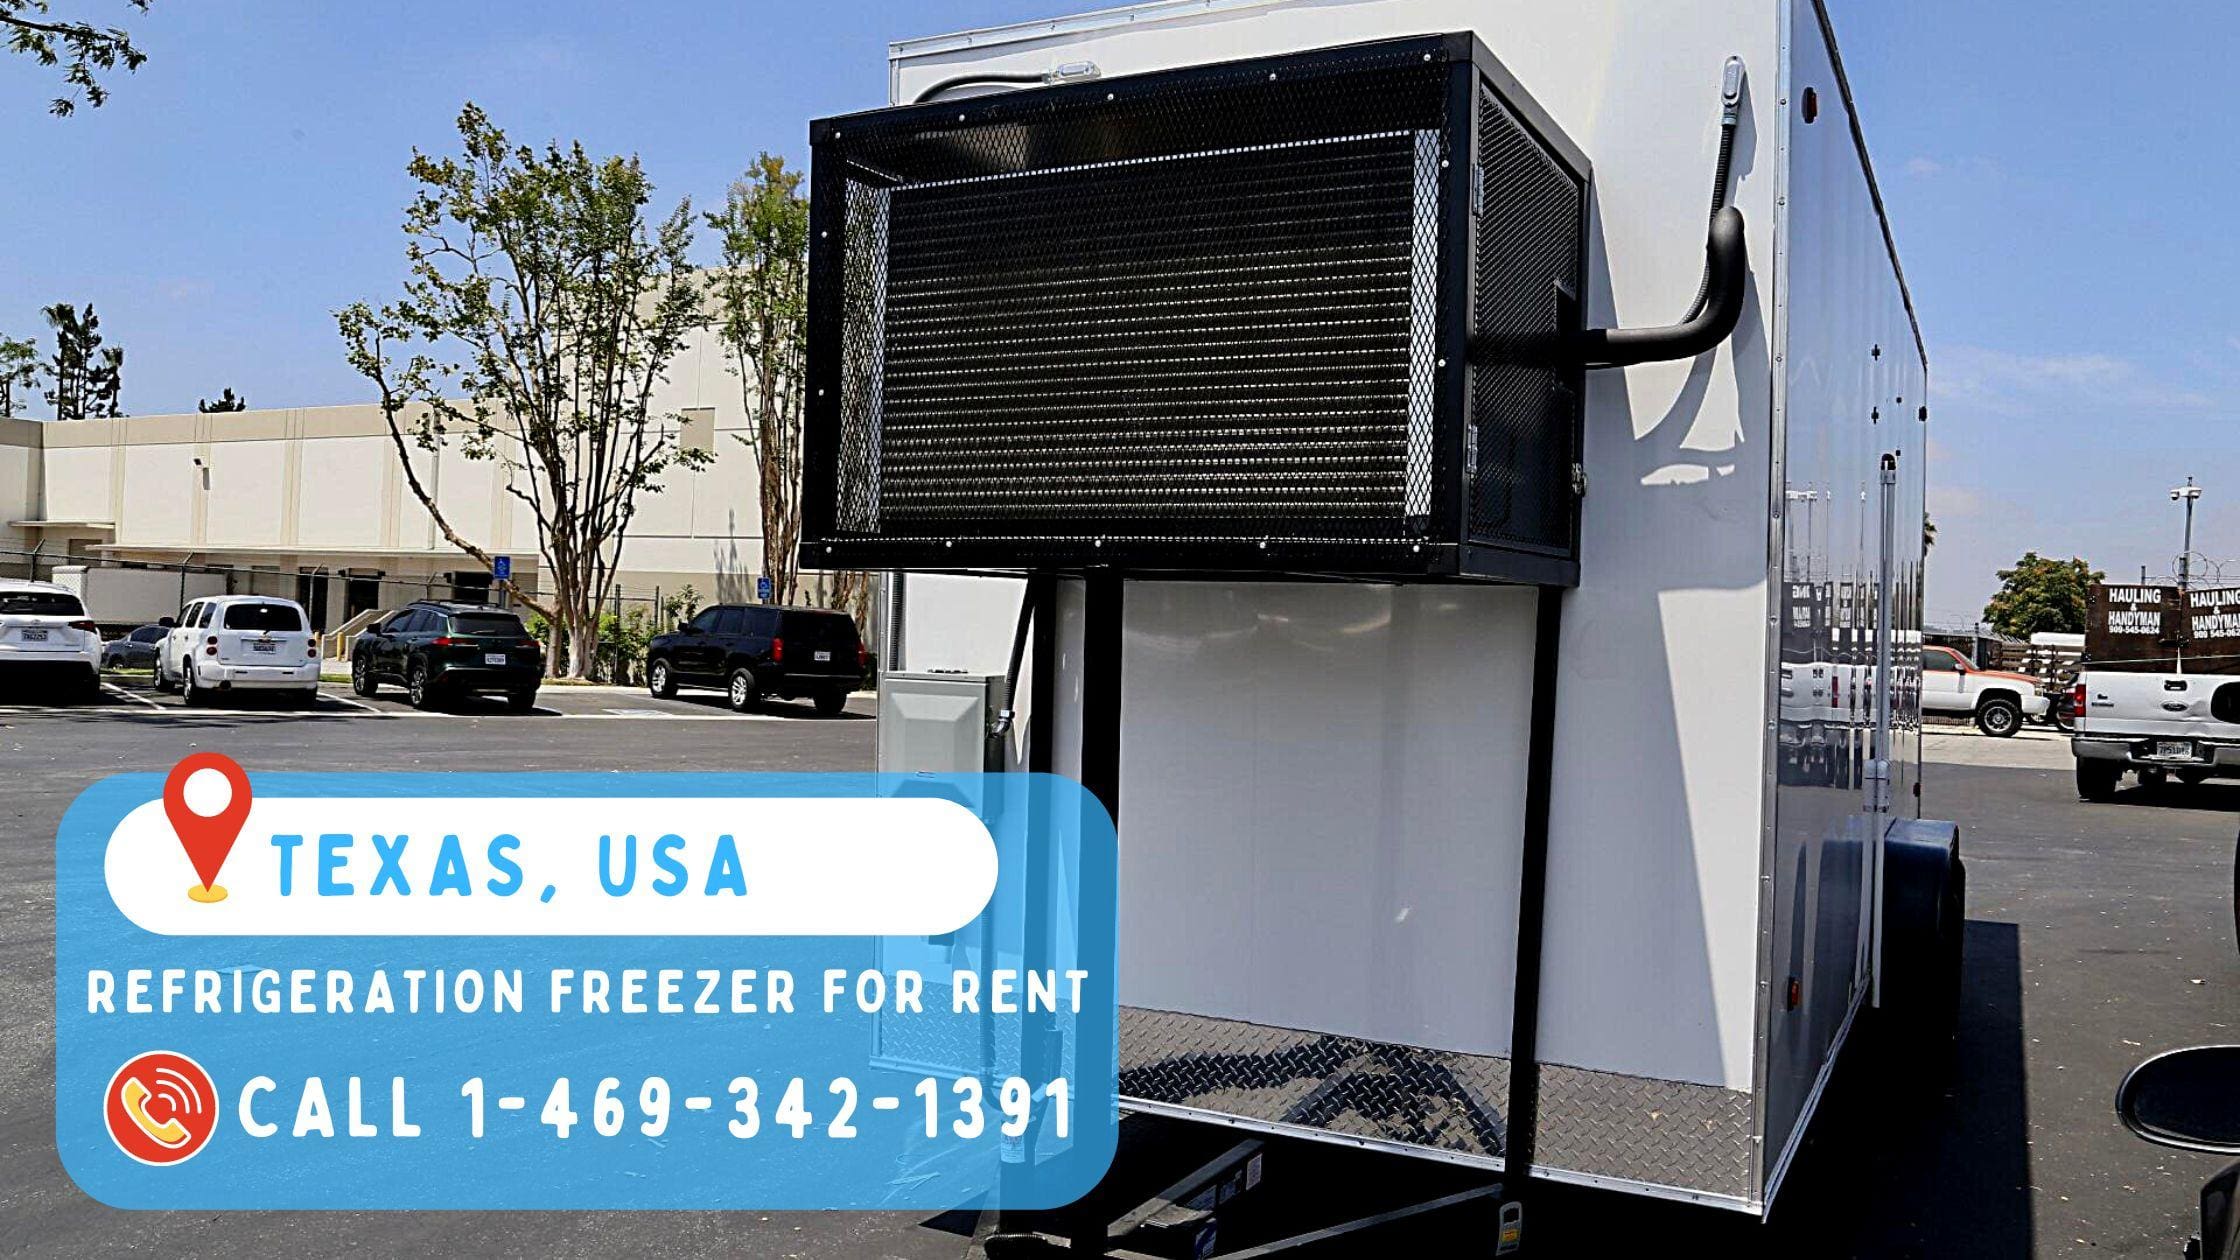 Refrigeration Freezer for rent in Texas